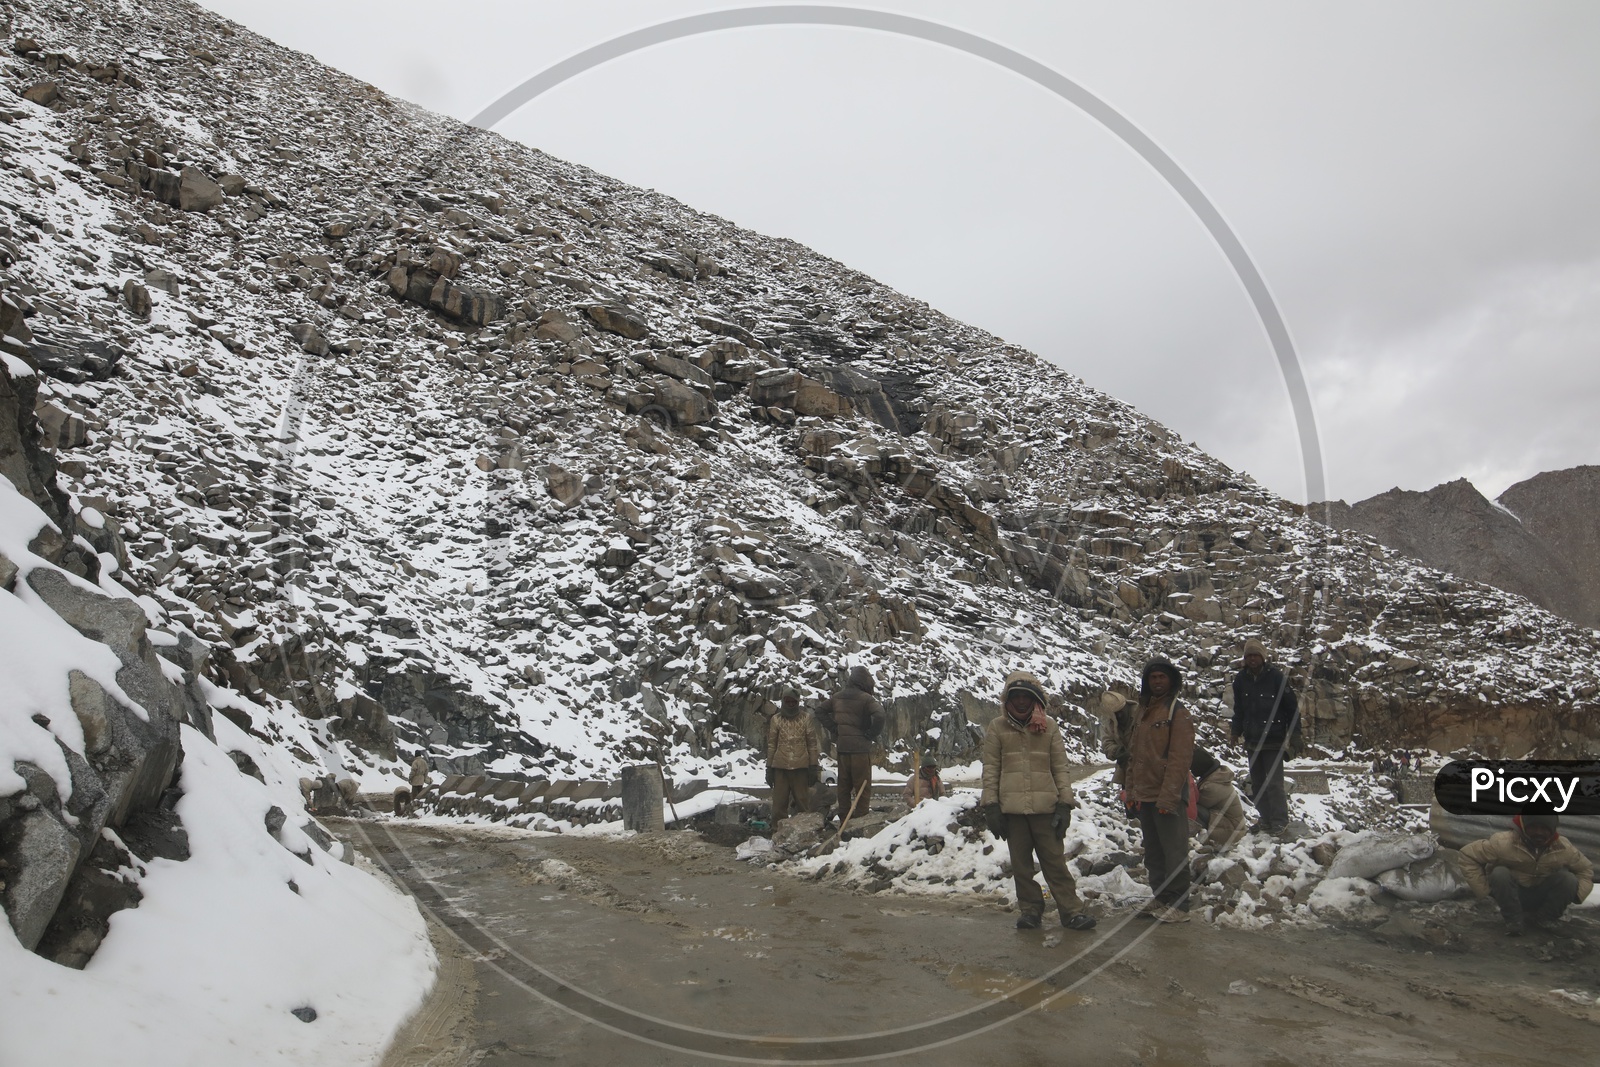 Local People on the Snow Filled Roads of leh